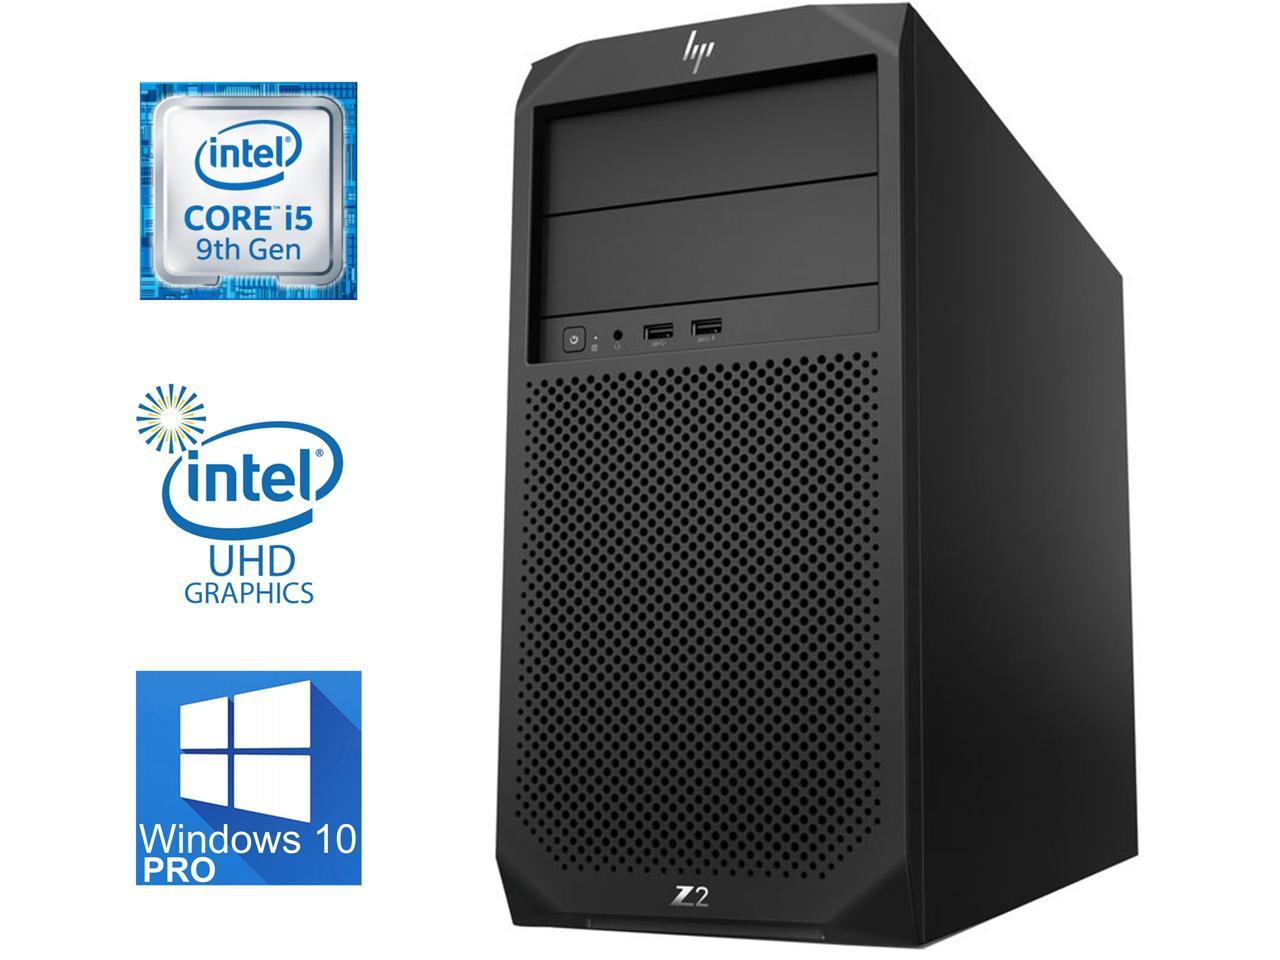 HP Z2 G4 Tower Workstation, 6-Core i5-9500 up to 4.40GHz, 16GB DDR4, 1TB NVMe SSD, Windows 10 Pro, USB 3.1, WiFi, 4K 3-Monitor Support, Display Port, DVDRW, LAN